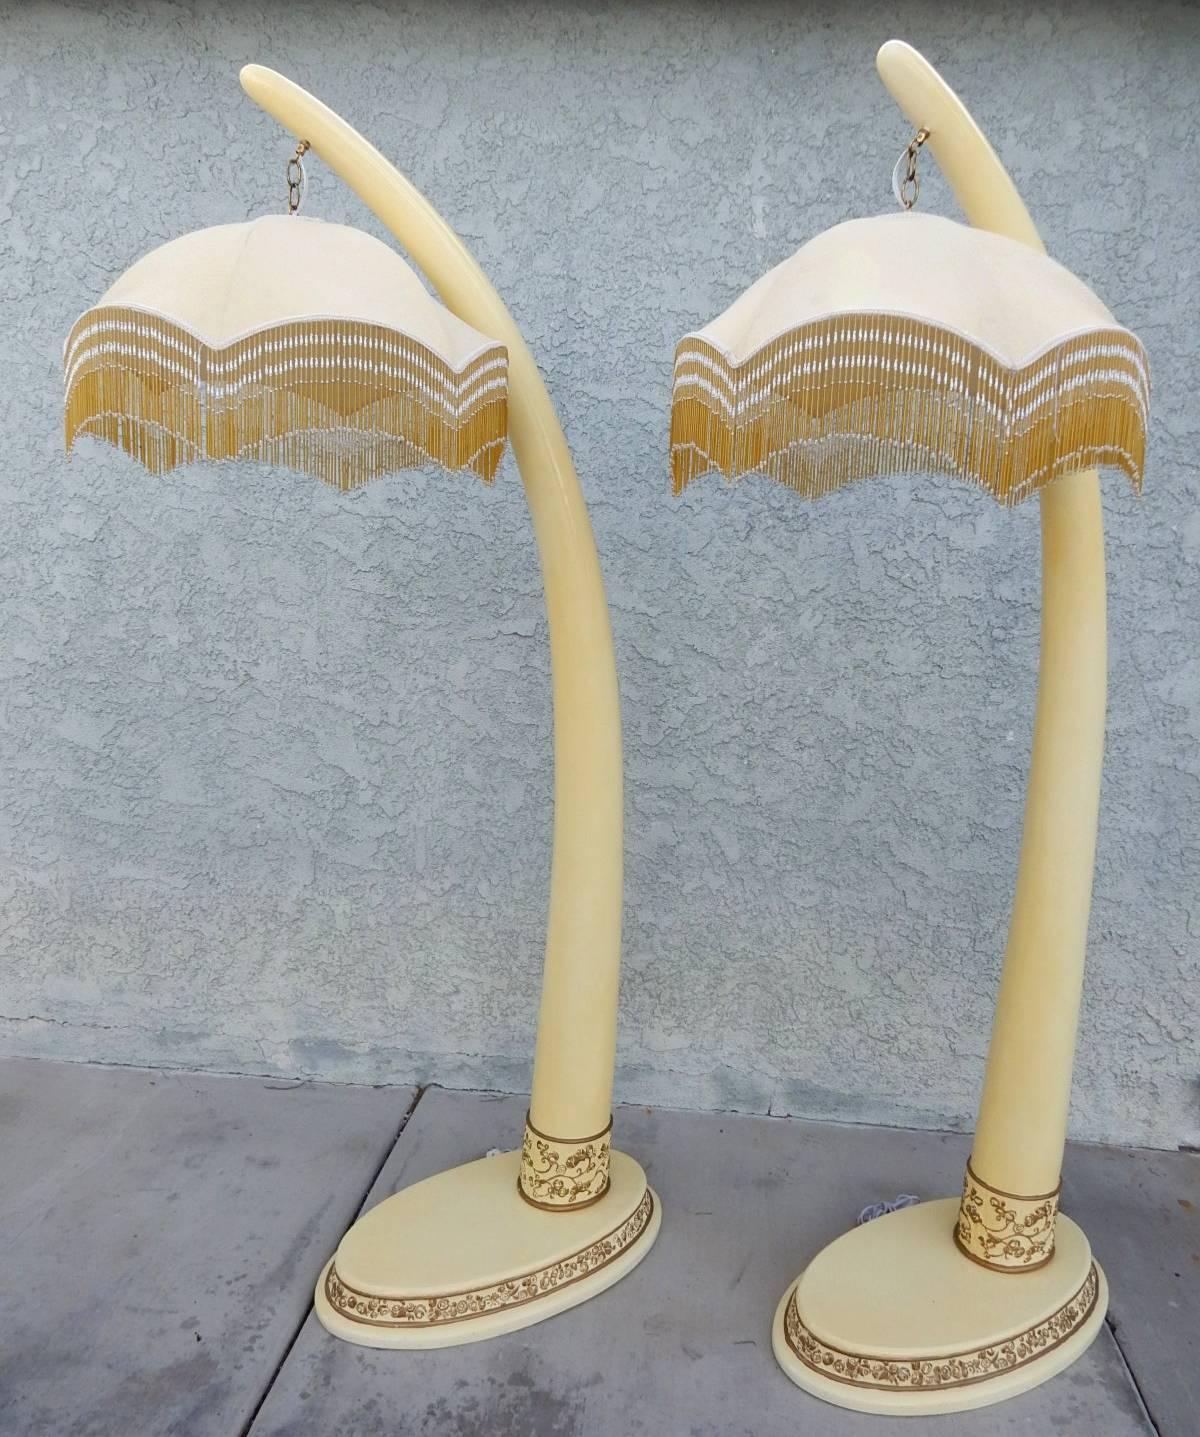 Monumental pair of faux elephant tusk floor lamps with glass beaded fringe shades.
Made of a composite plastic, circa 1960s in the style of the Art Deco era.
Not signed or marked.
 